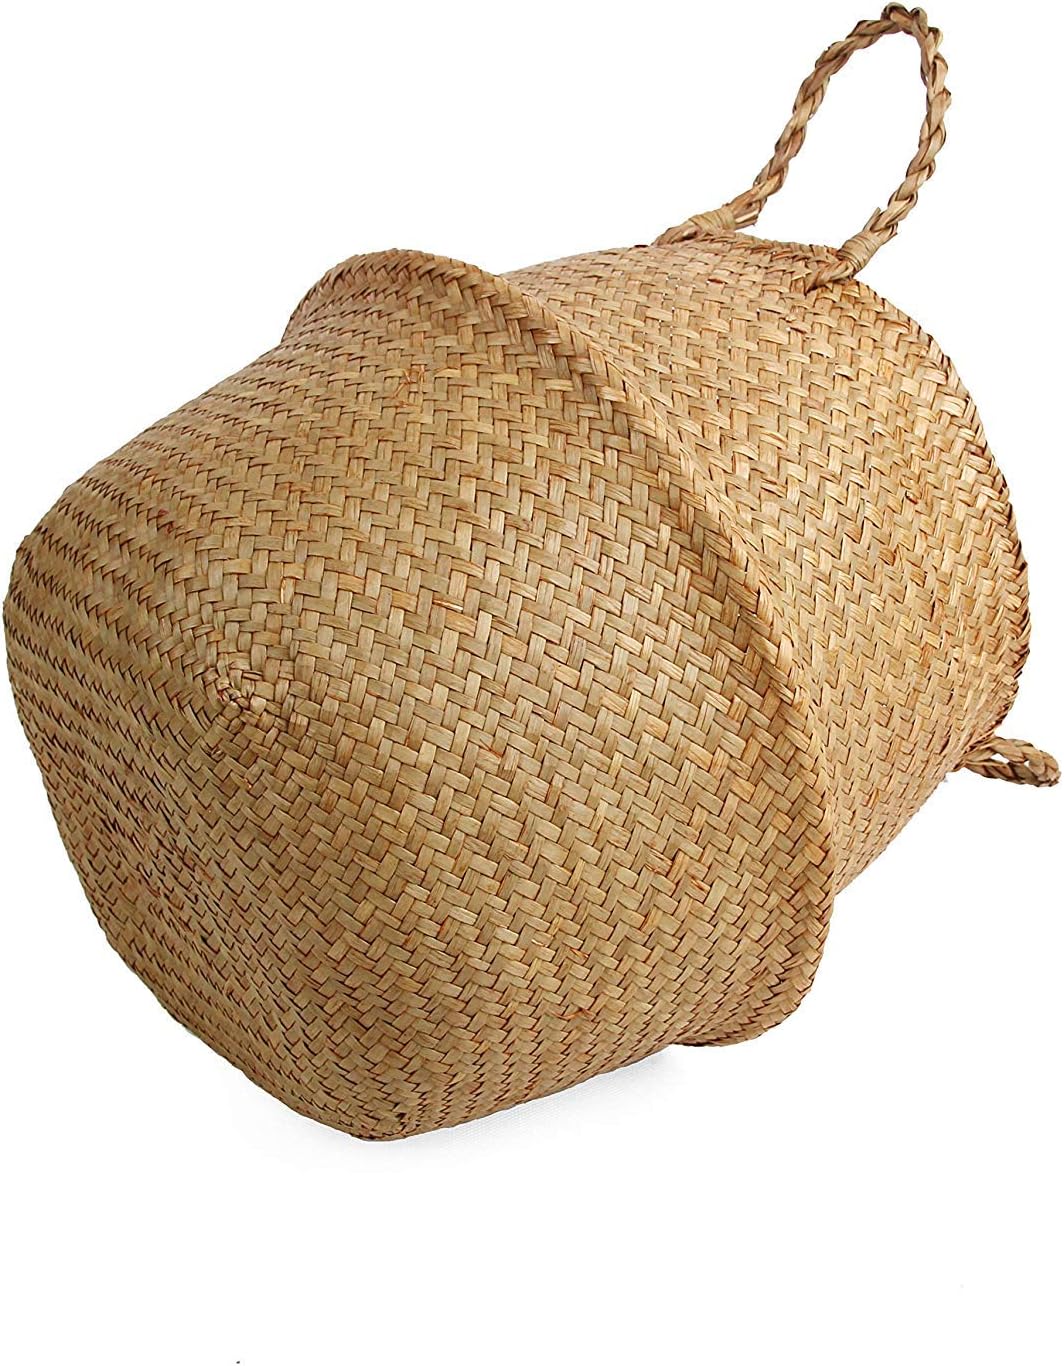 Woven Seagrass Belly Basket for Storage Plant Pot Basket Graceland Home and Living